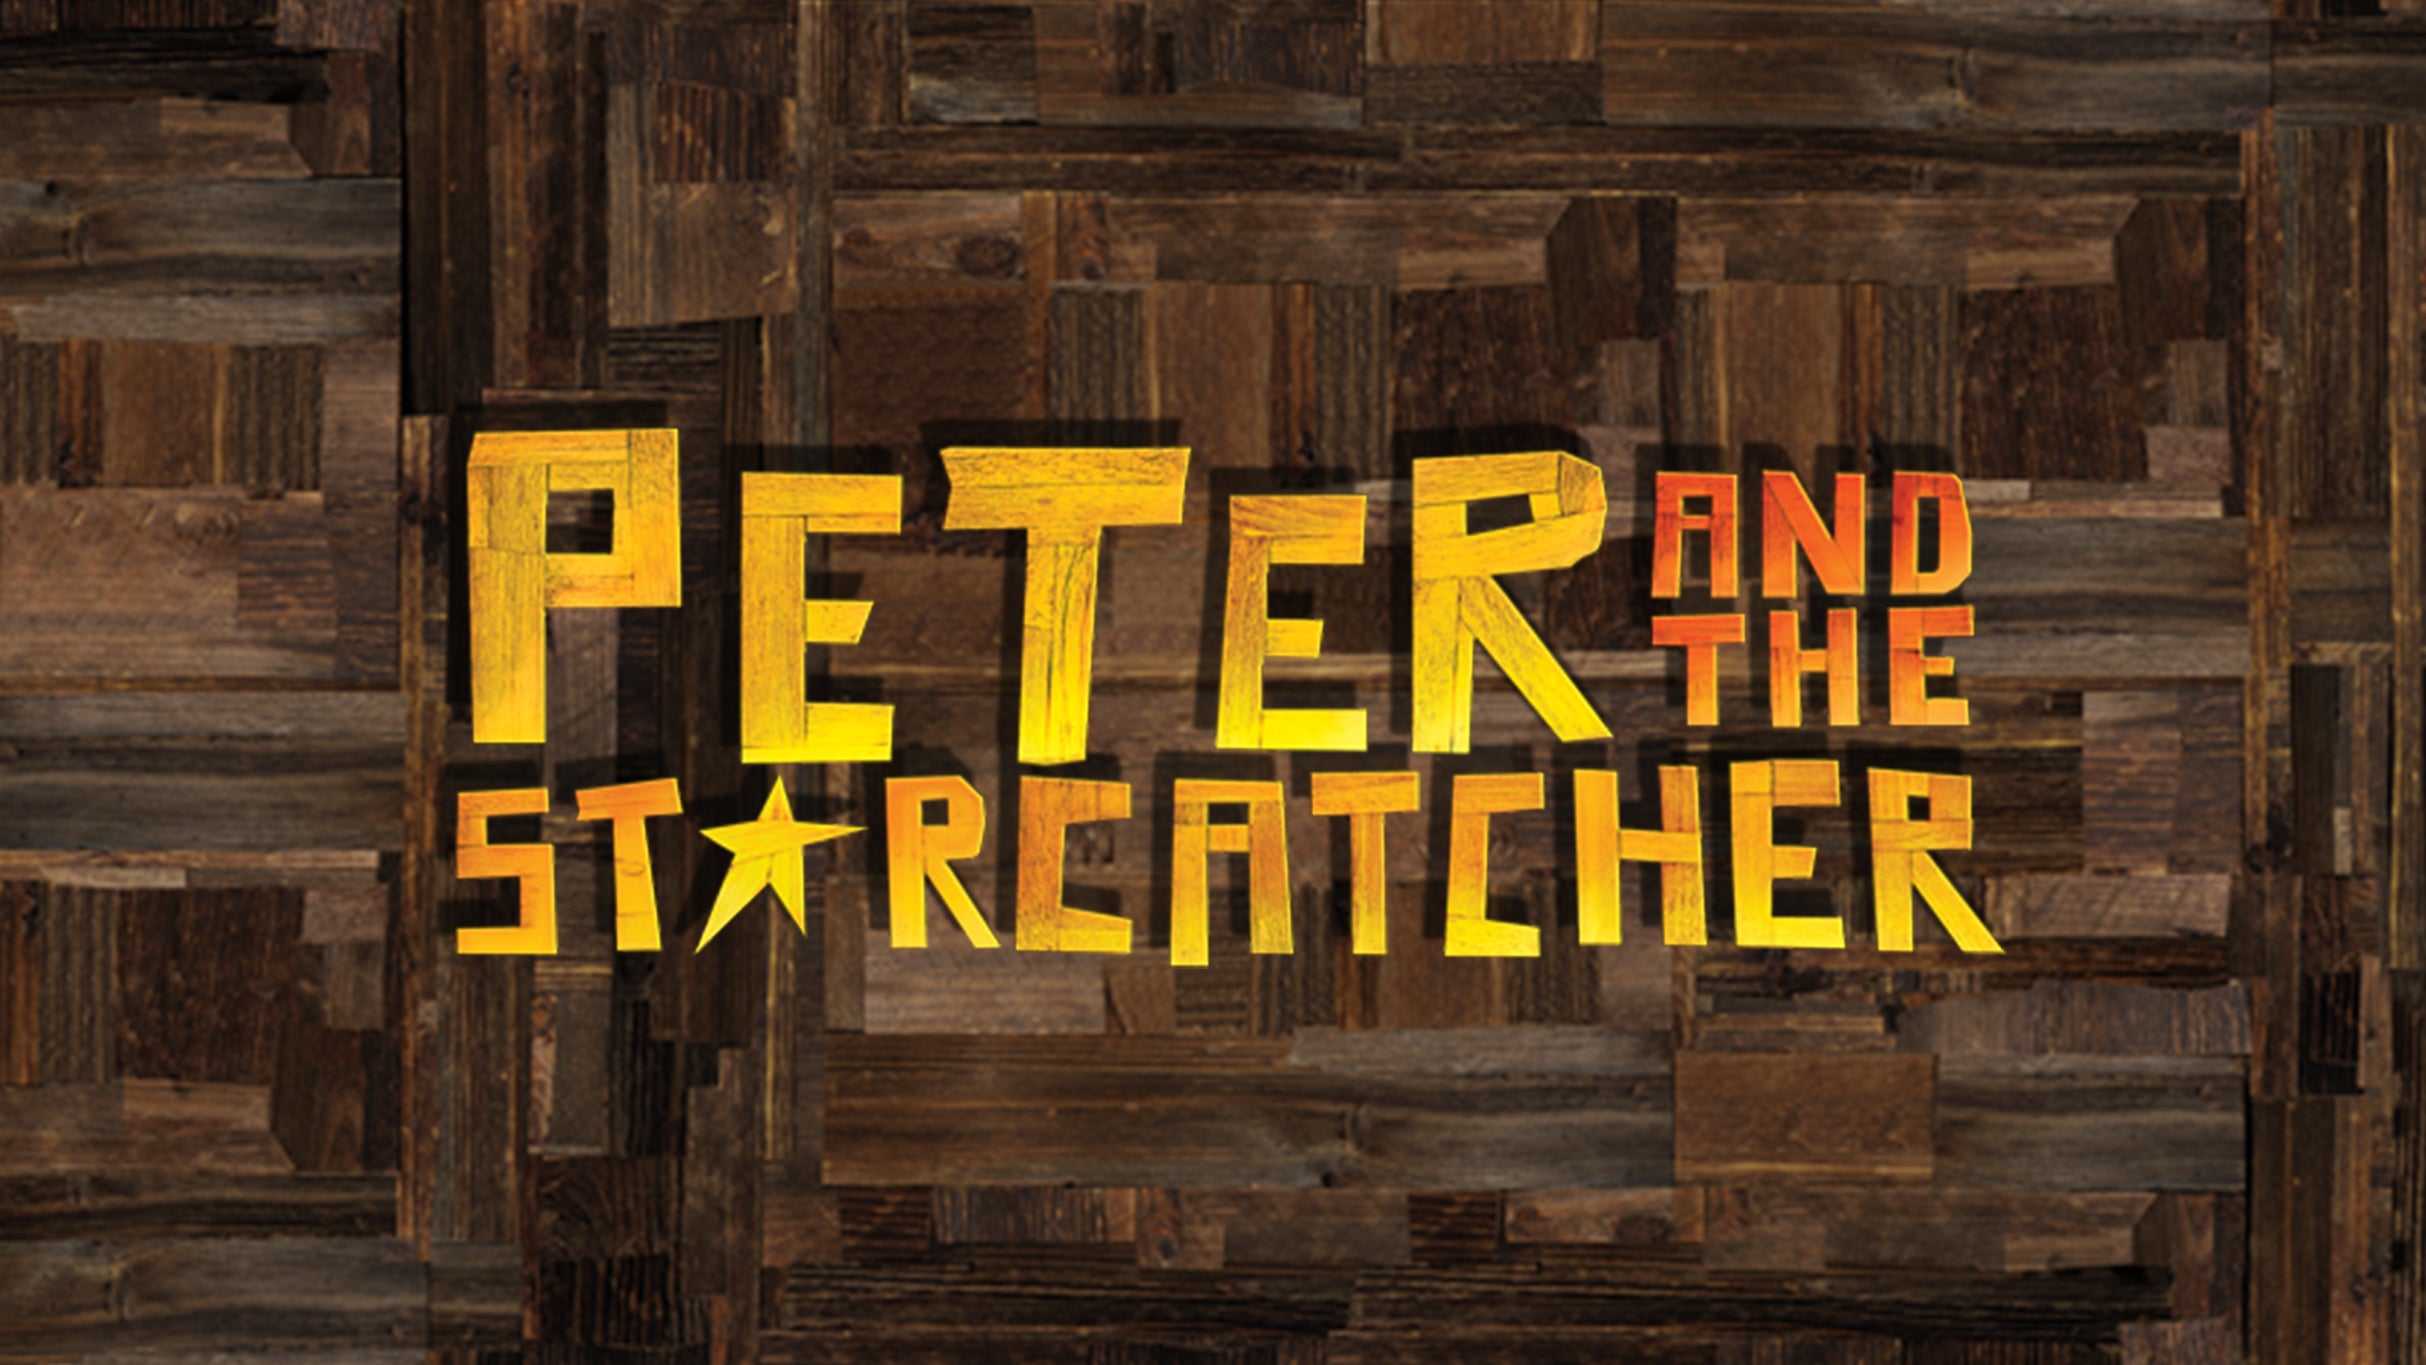 Peter and the Starcatcher at Cary Arts Center